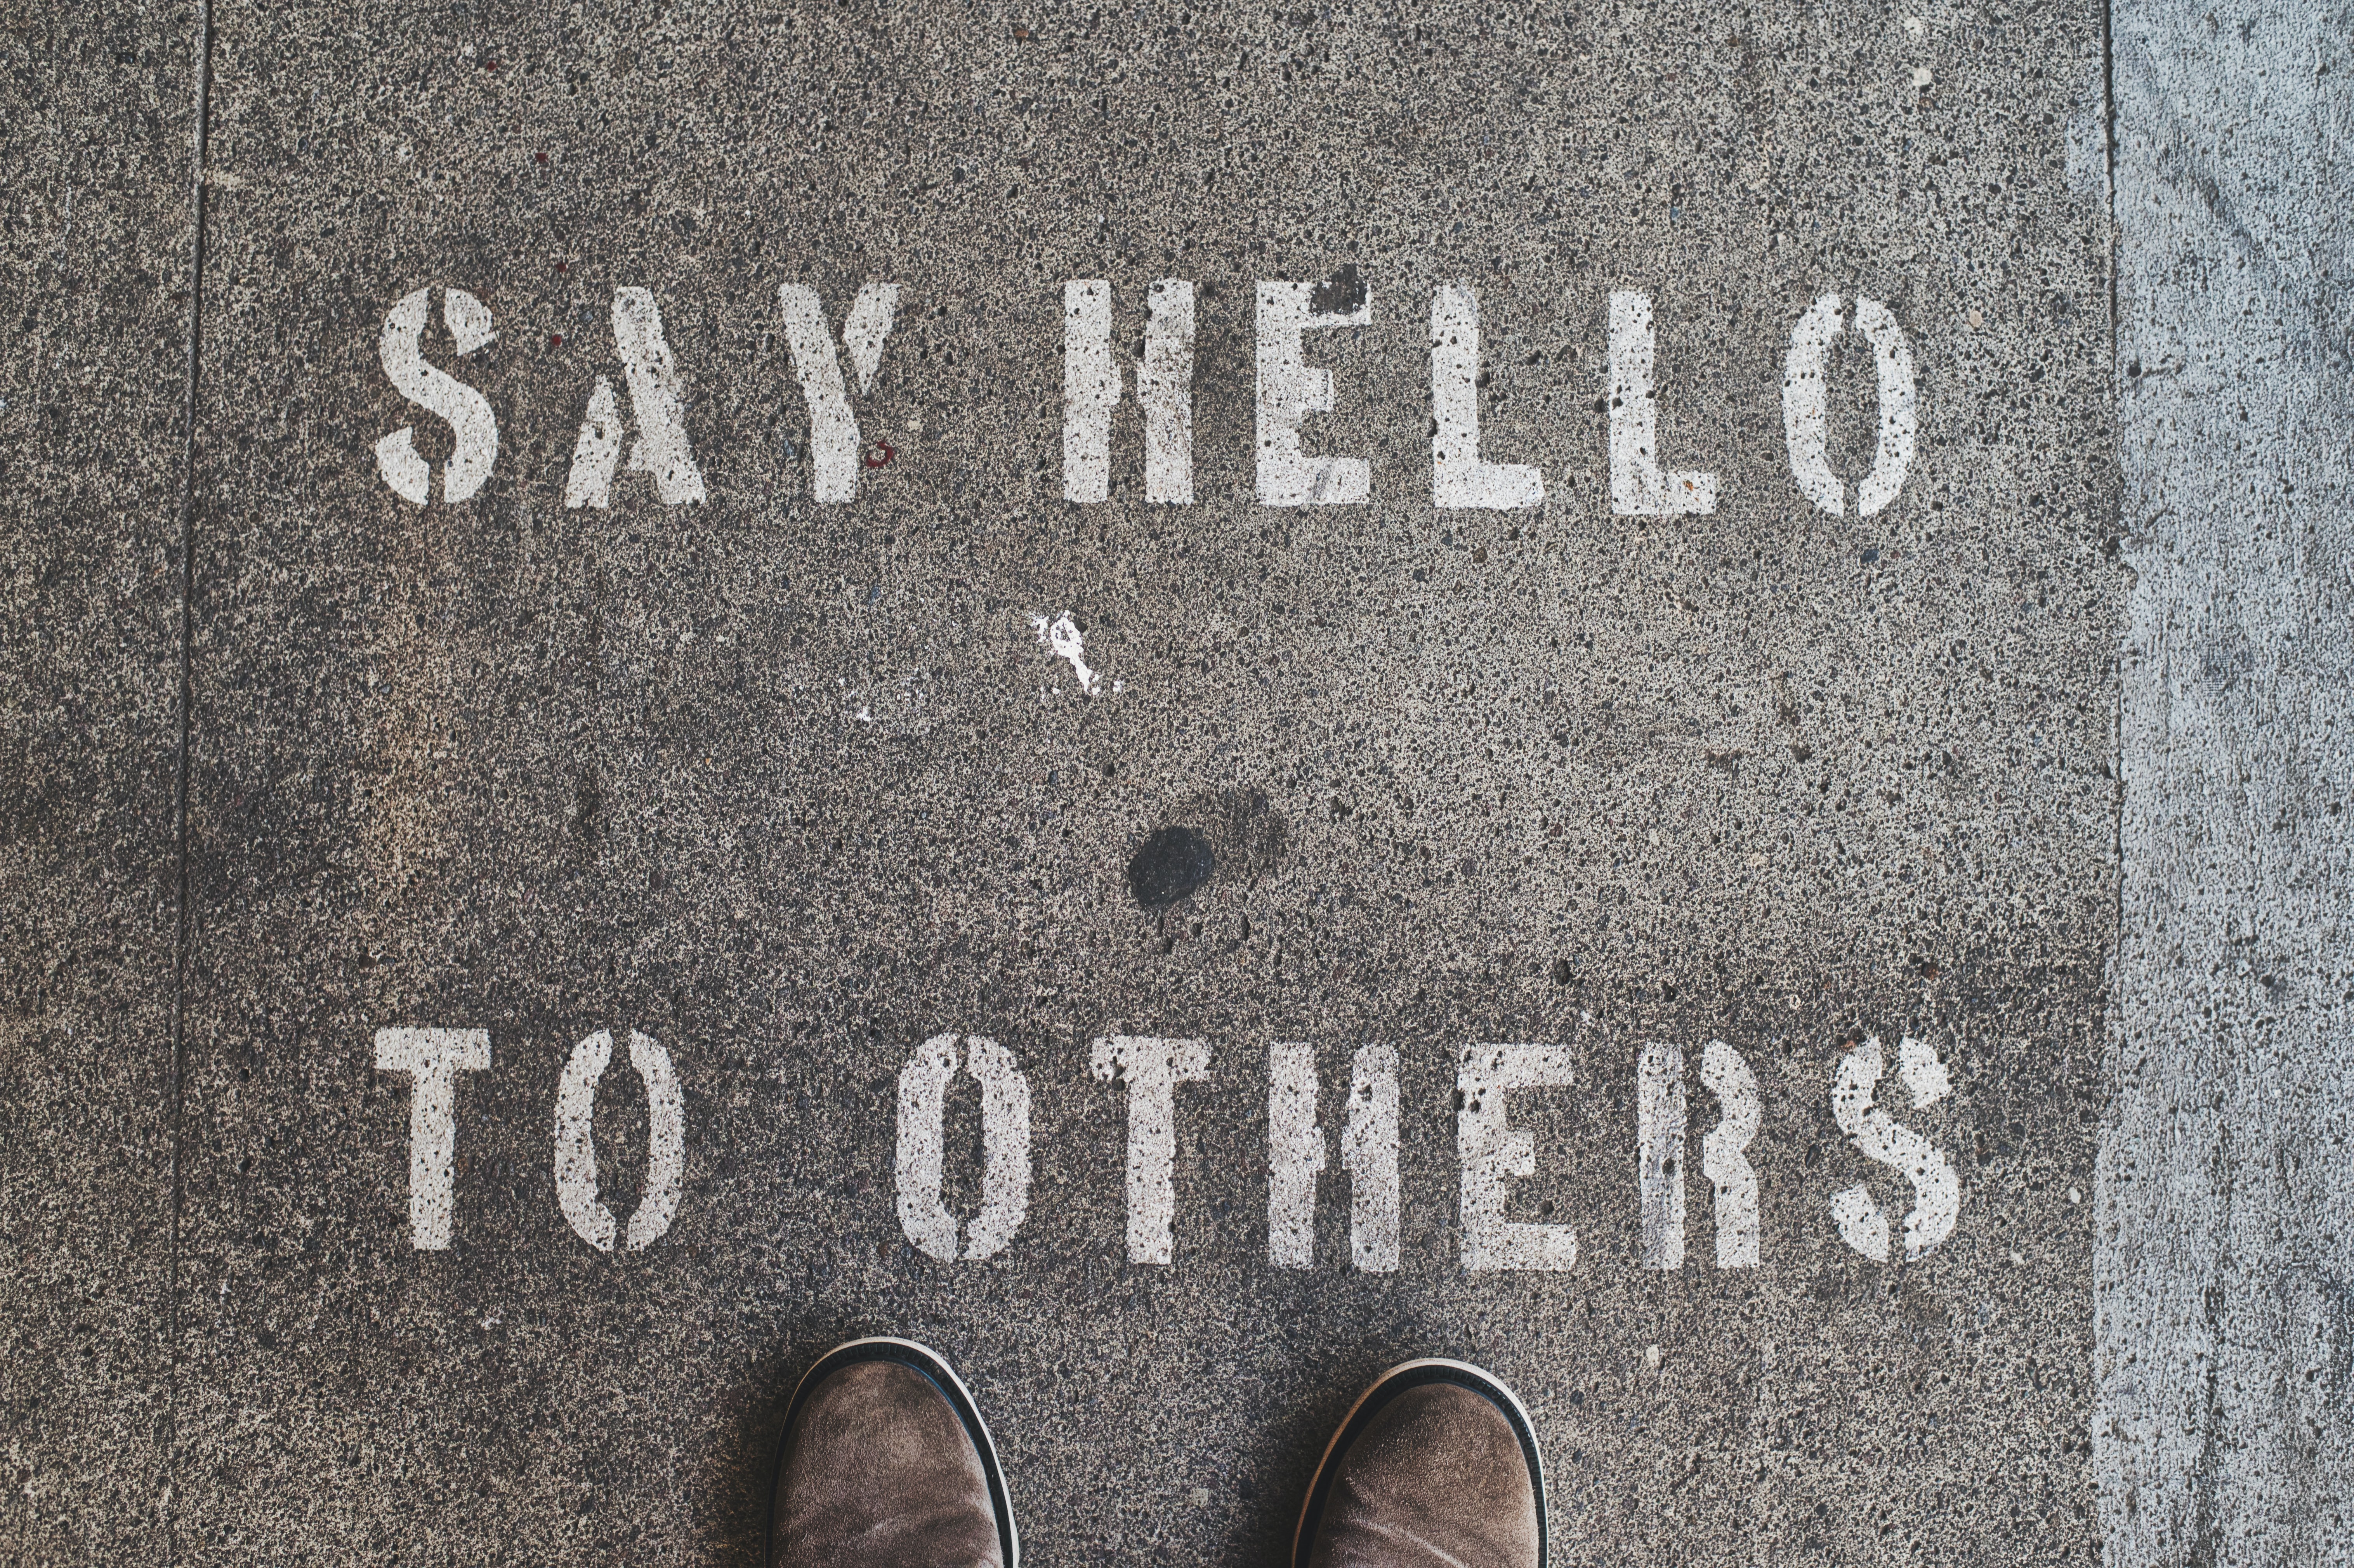 Picture of sidewalk art that says "Say hello to others."